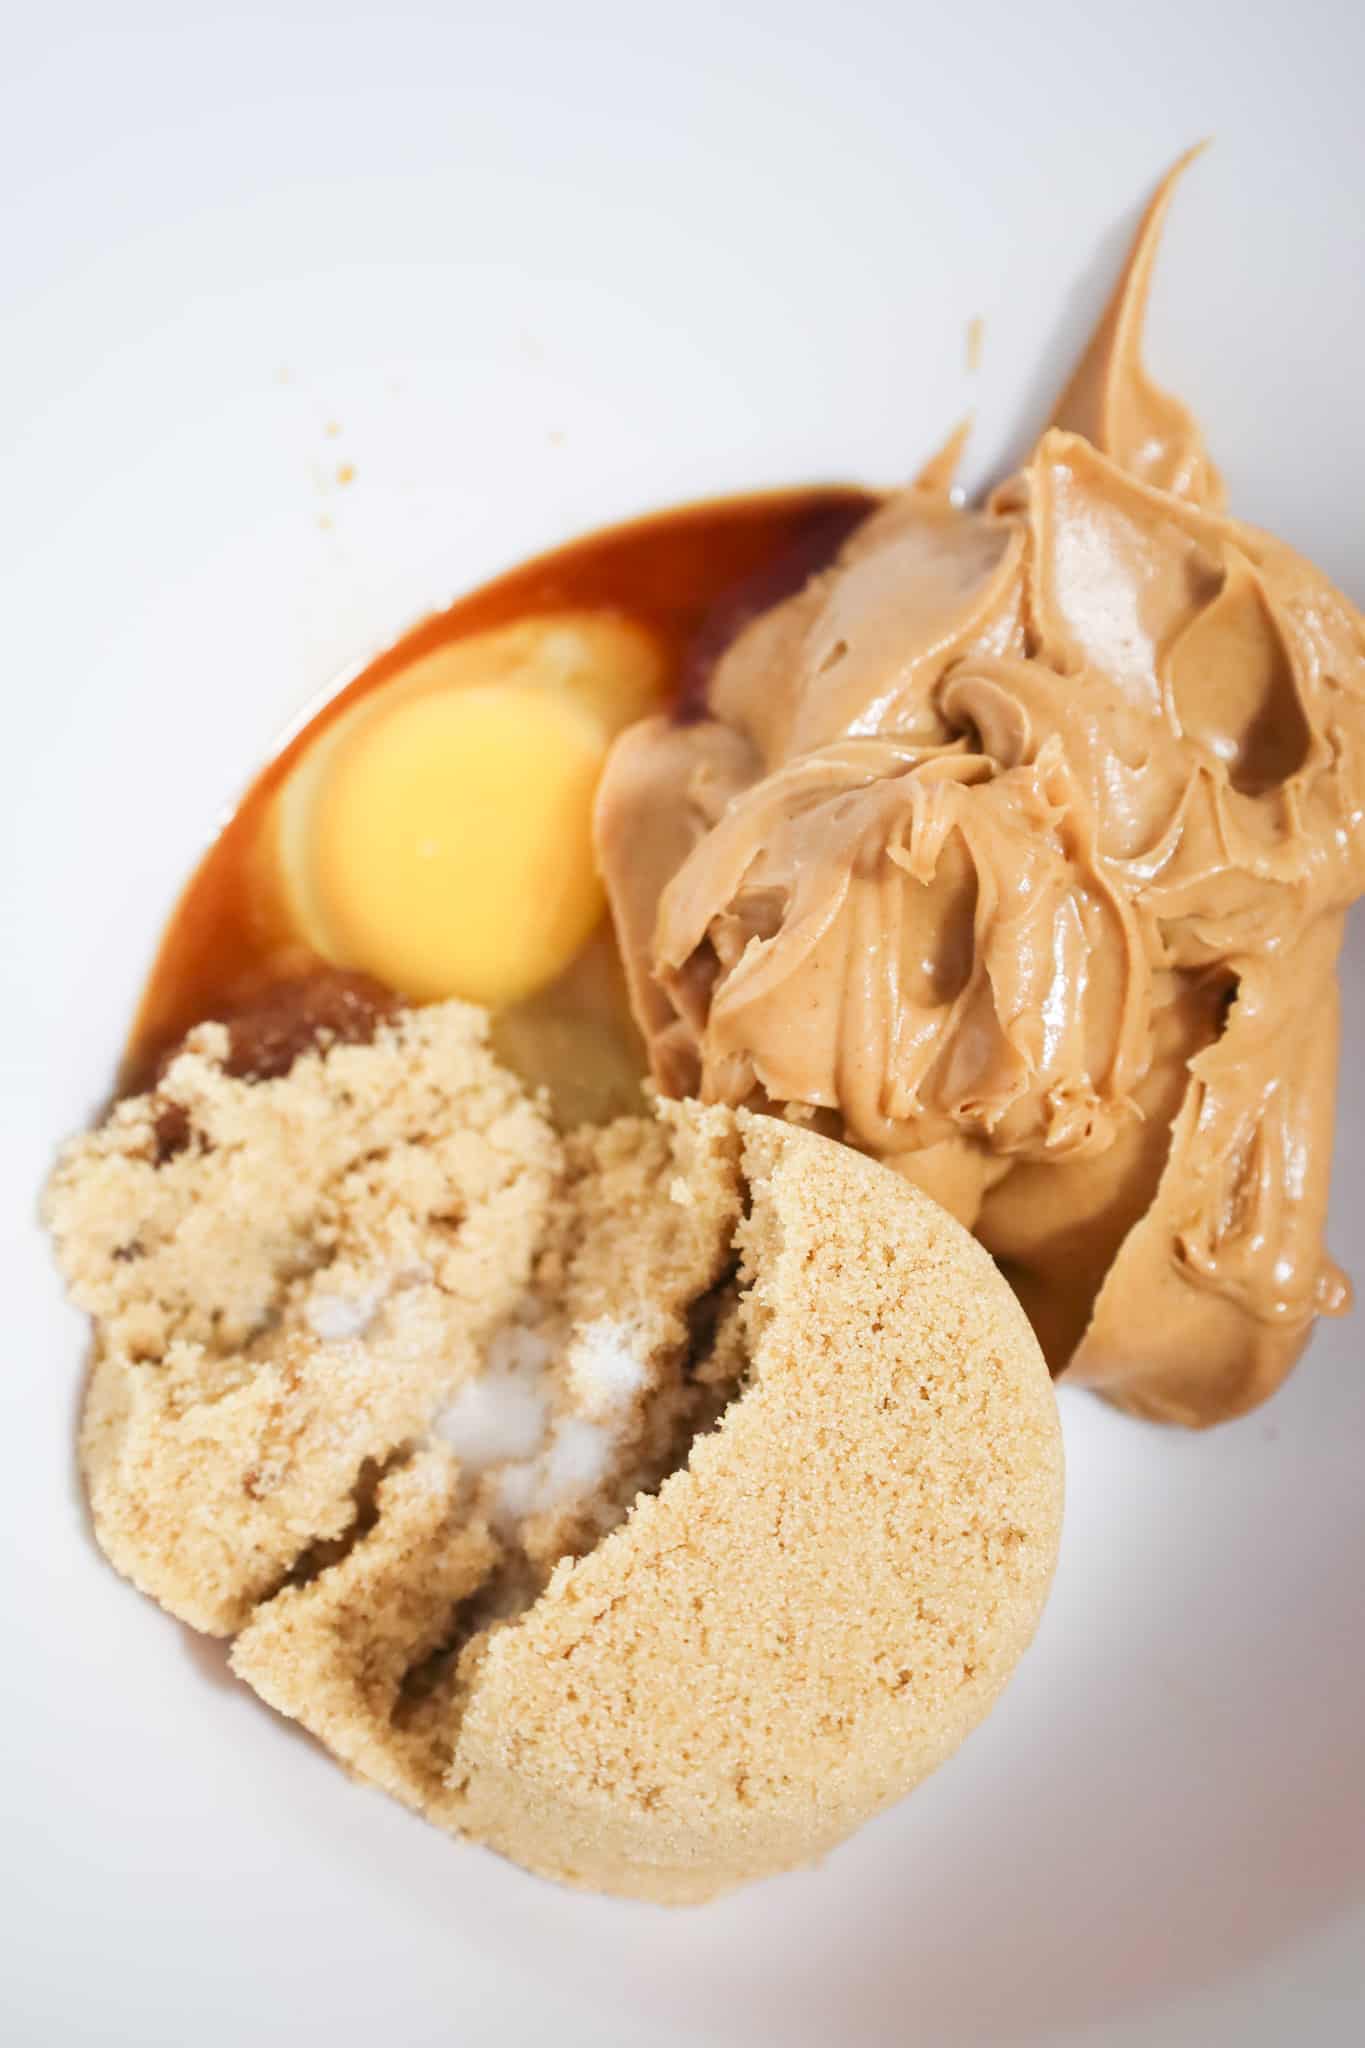 smooth peanut butter, brown sugar, an egg and vanilla extract in a mixing bowl